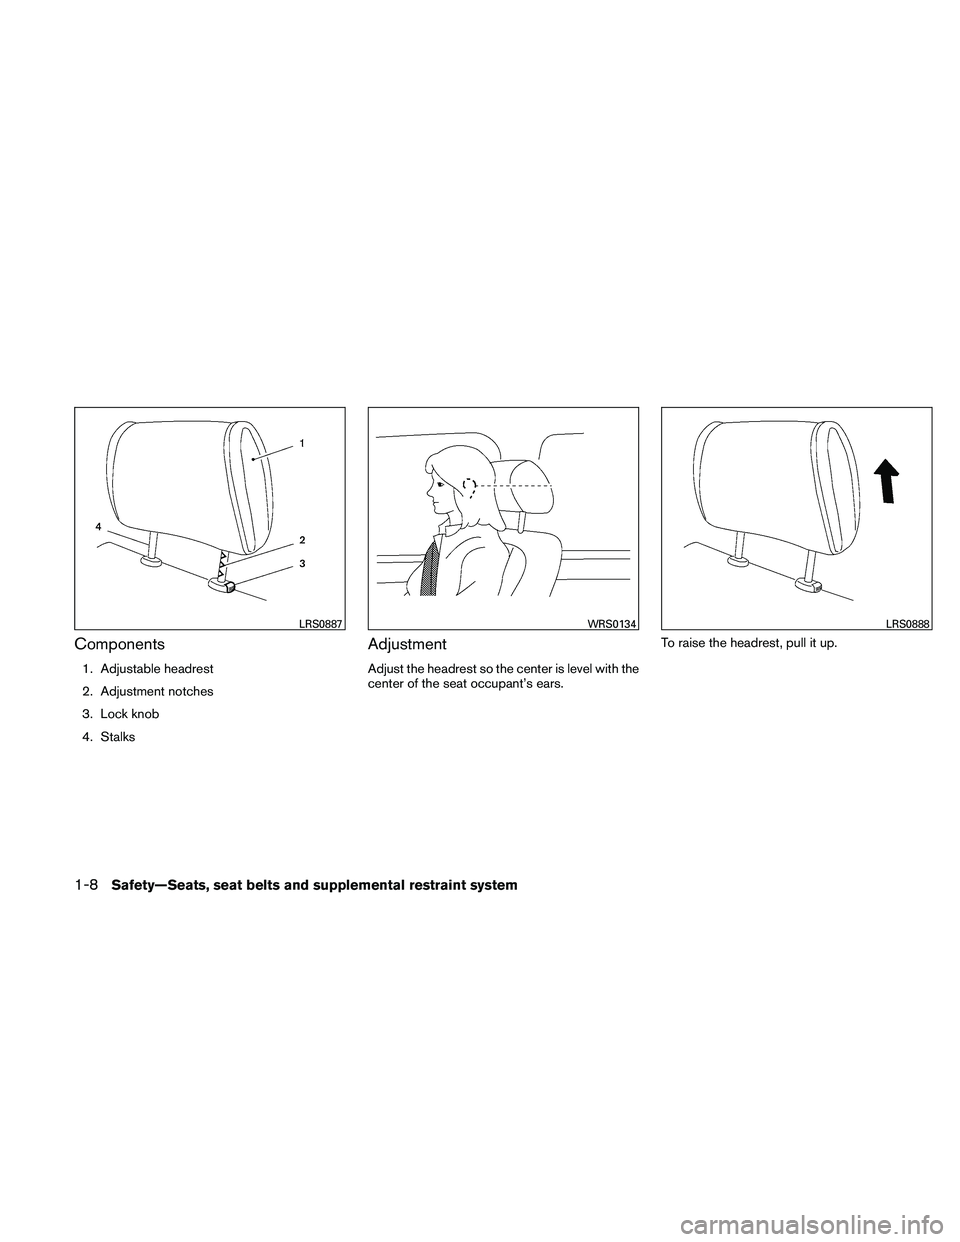 NISSAN XTERRA 2010  Owner´s Manual Components
1. Adjustable headrest
2. Adjustment notches
3. Lock knob
4. Stalks
Adjustment
Adjust the headrest so the center is level with the
center of the seat occupant’s ears.To raise the headrest